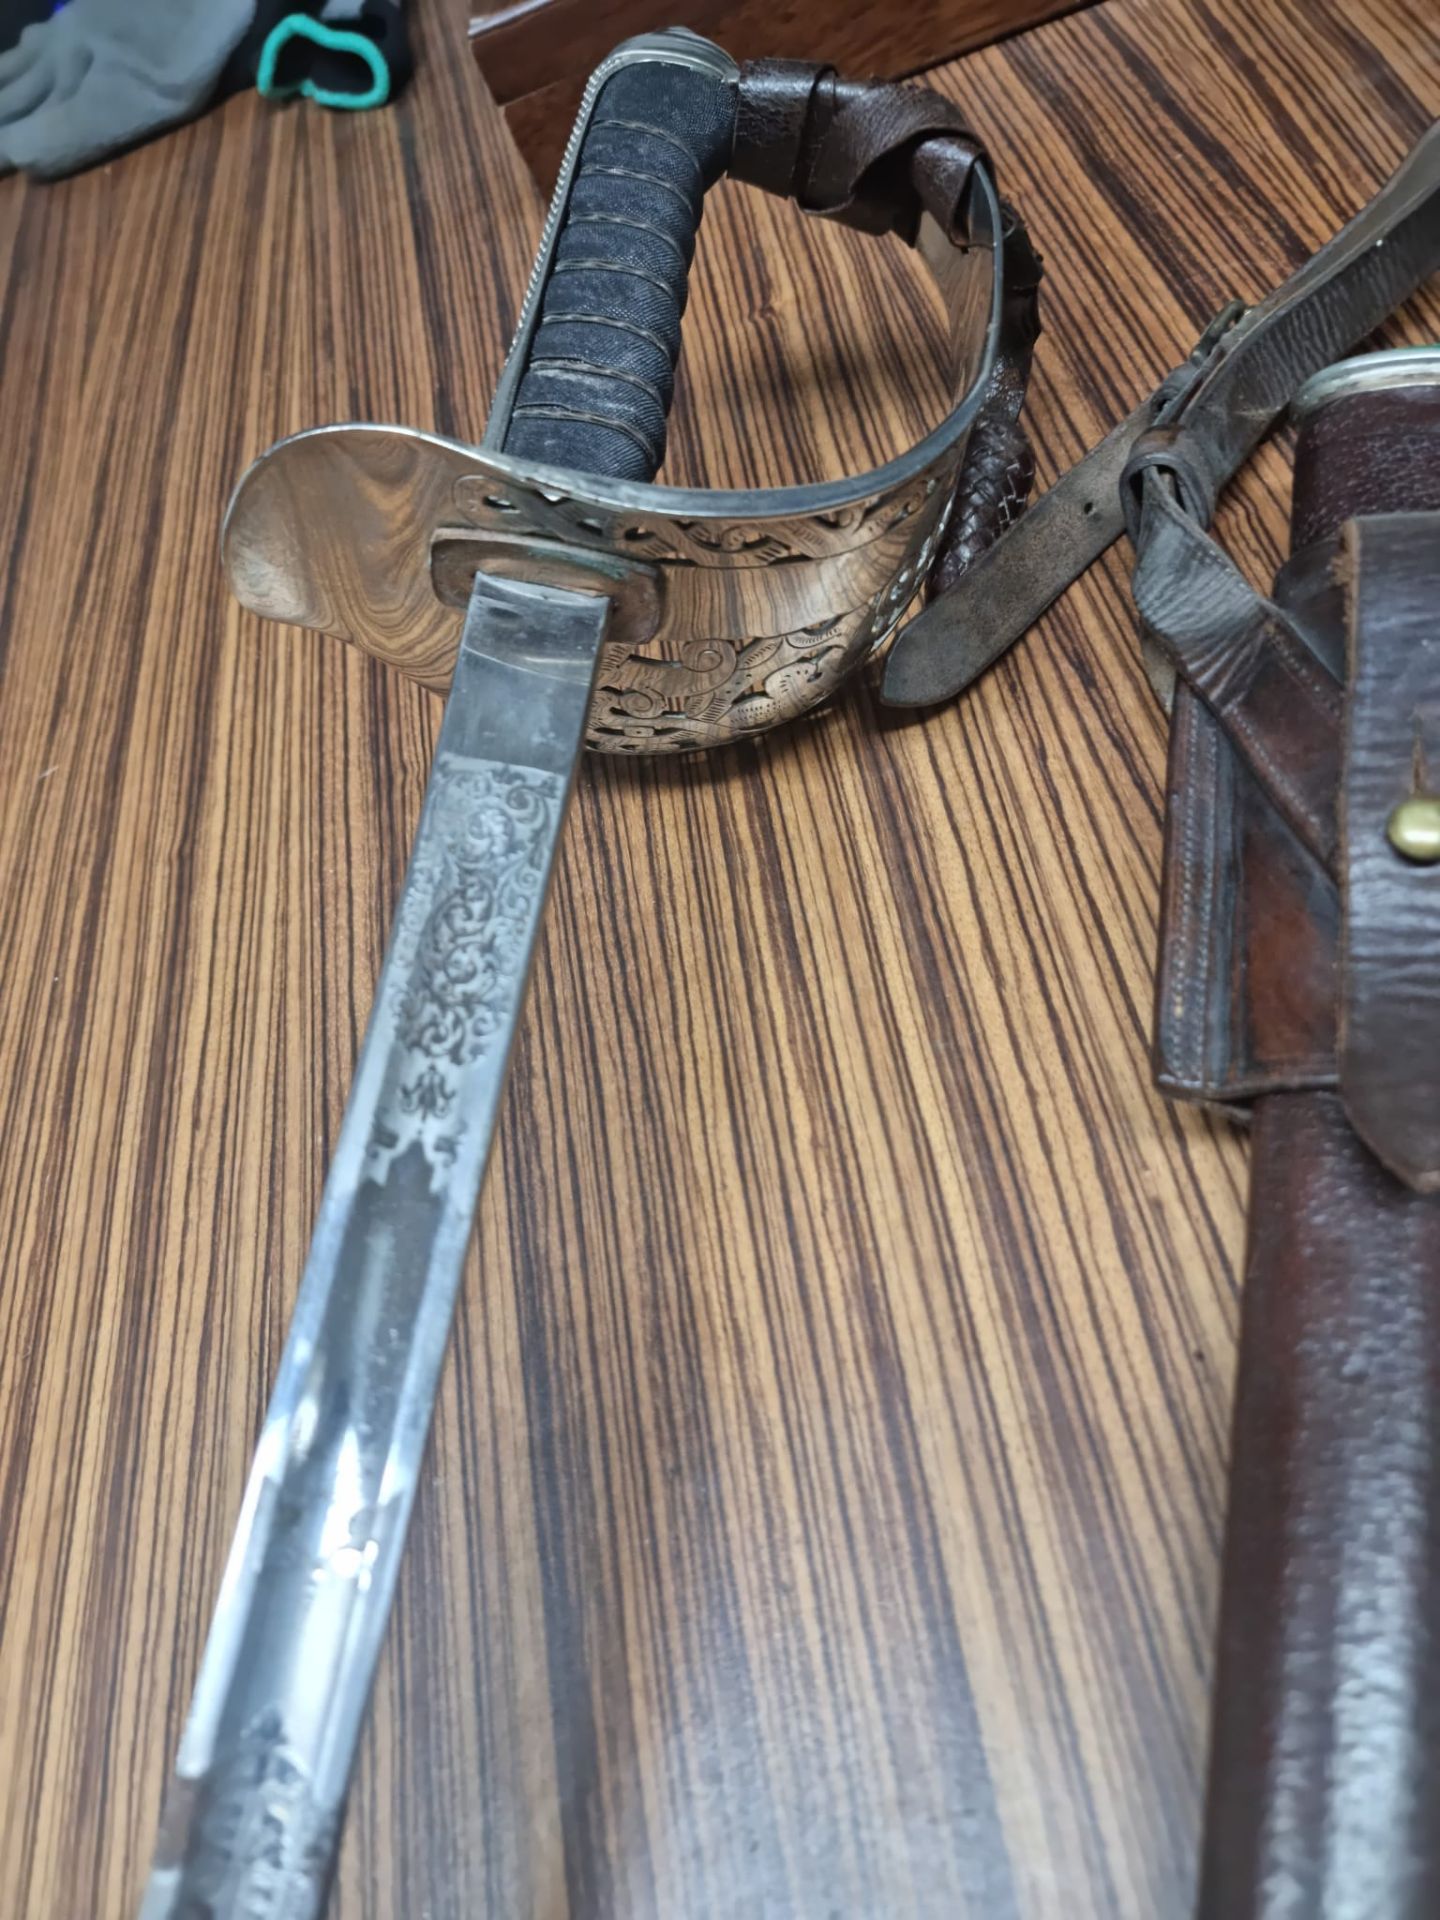 British Wilkinson Sword Co. Officer's saber. Wilkinson circular proofmark used in 1880s through